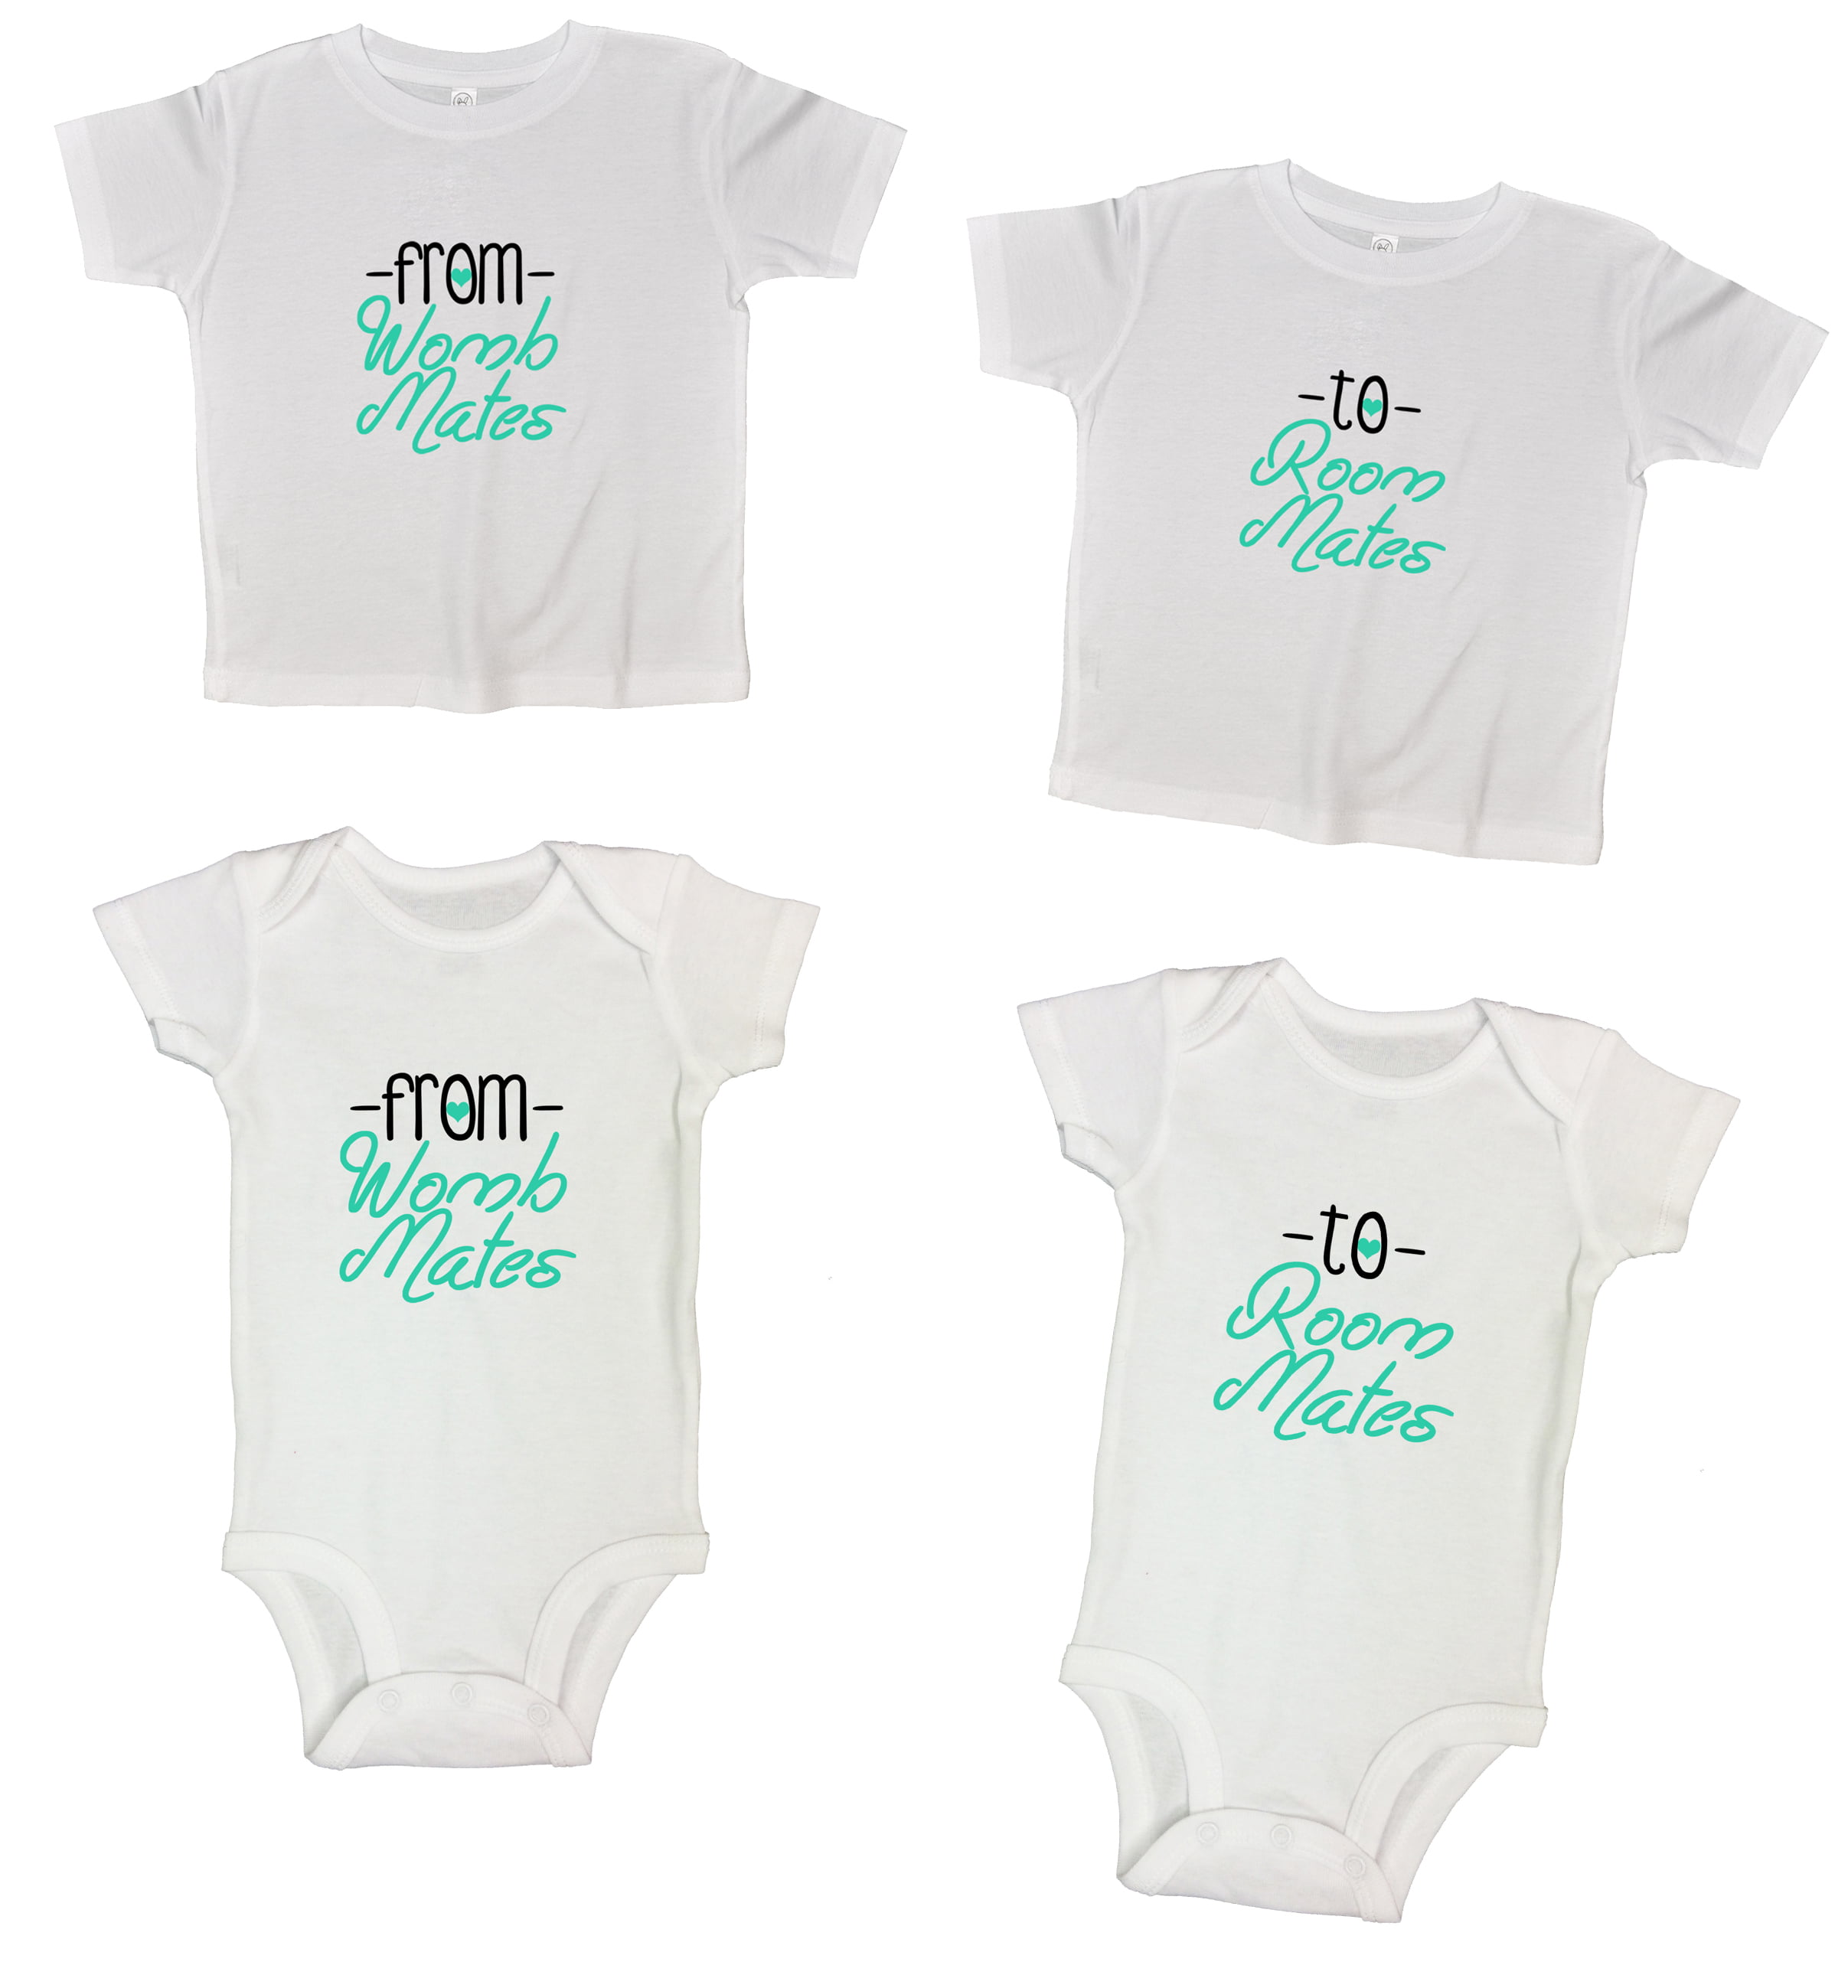 Twin Onesies Womb Mates Baby One-piece outfits Newborn Girls & Boys 2pc Set 